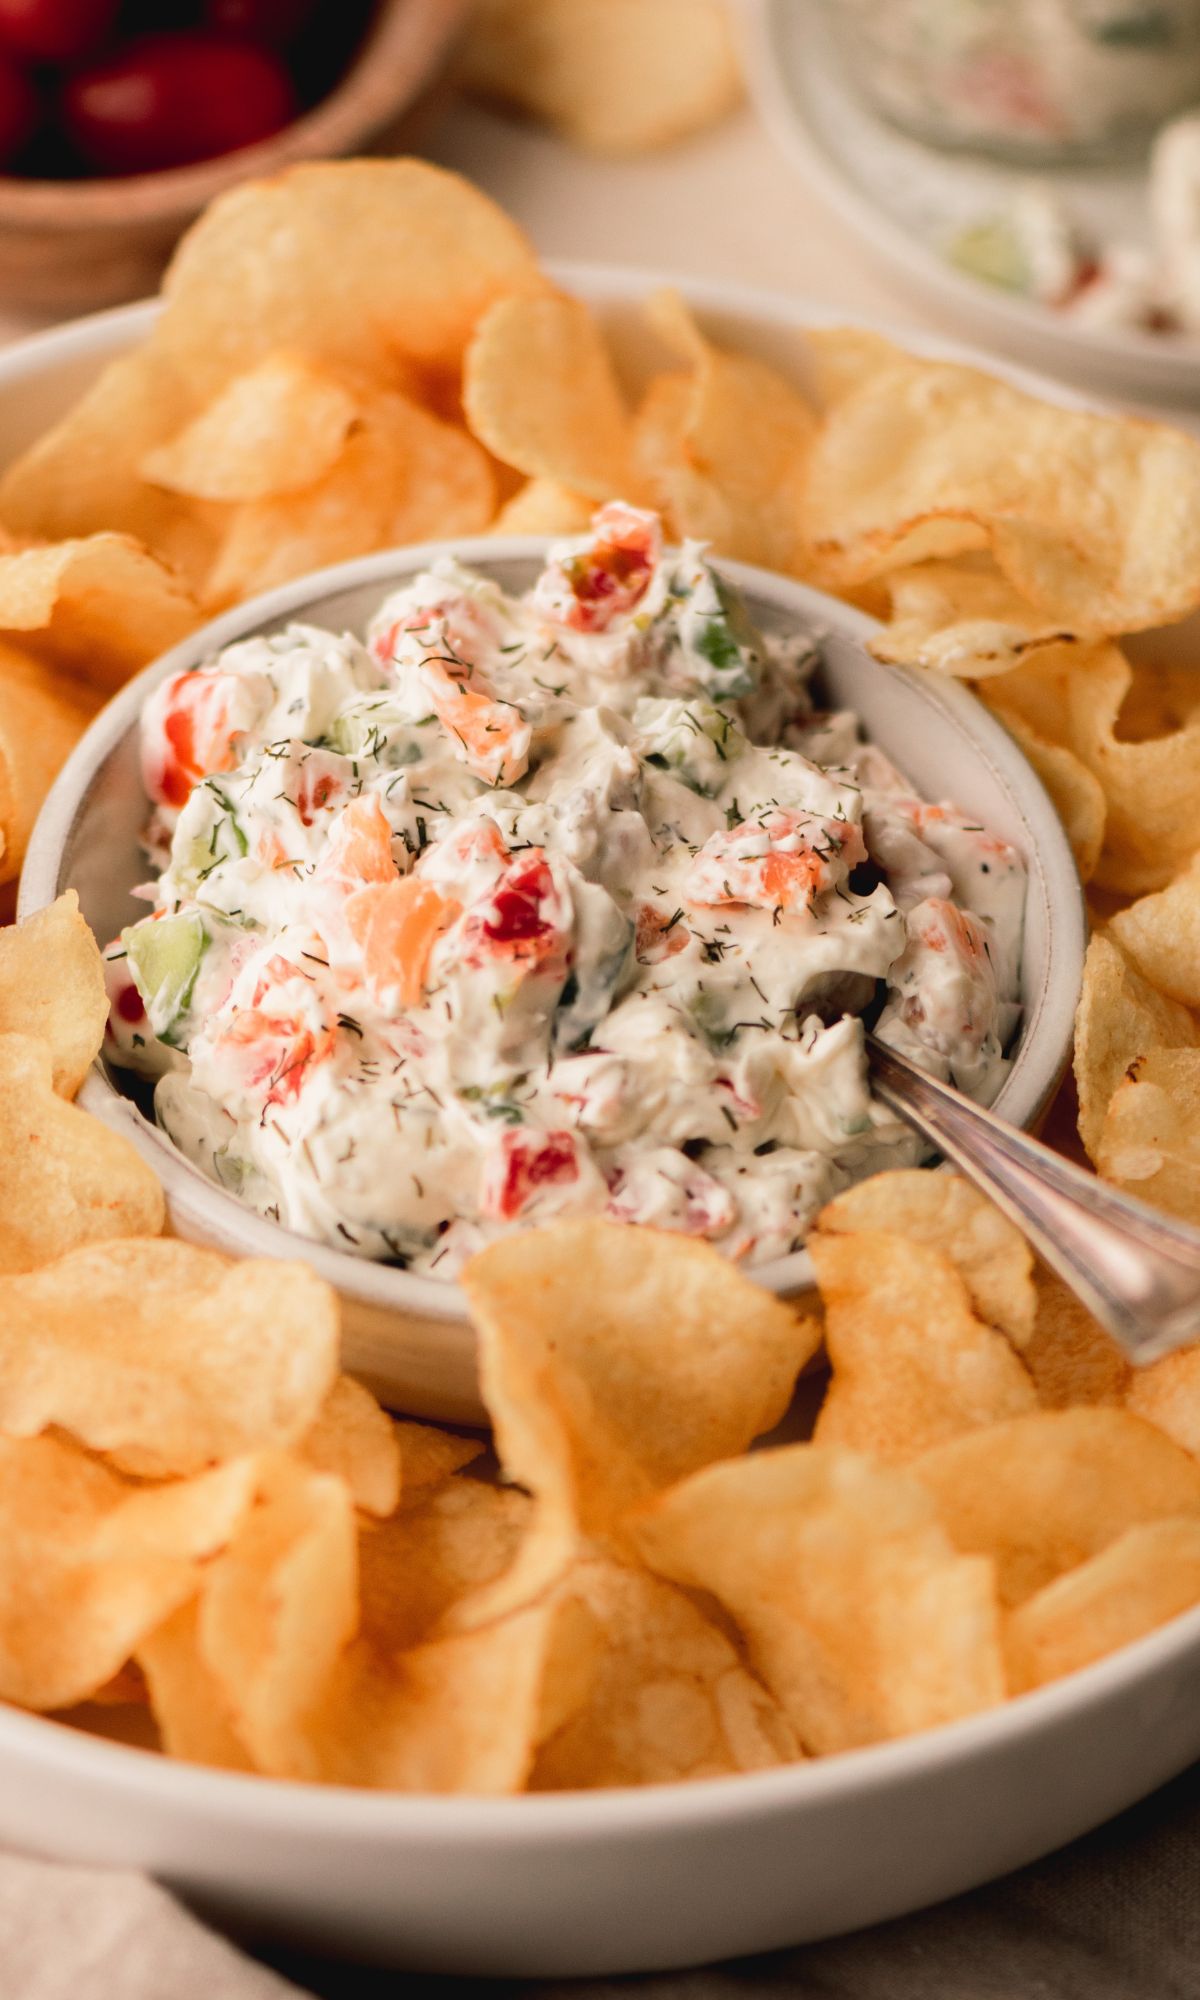 Smoked salmon dip in a white bowl surrounded by potato chips.